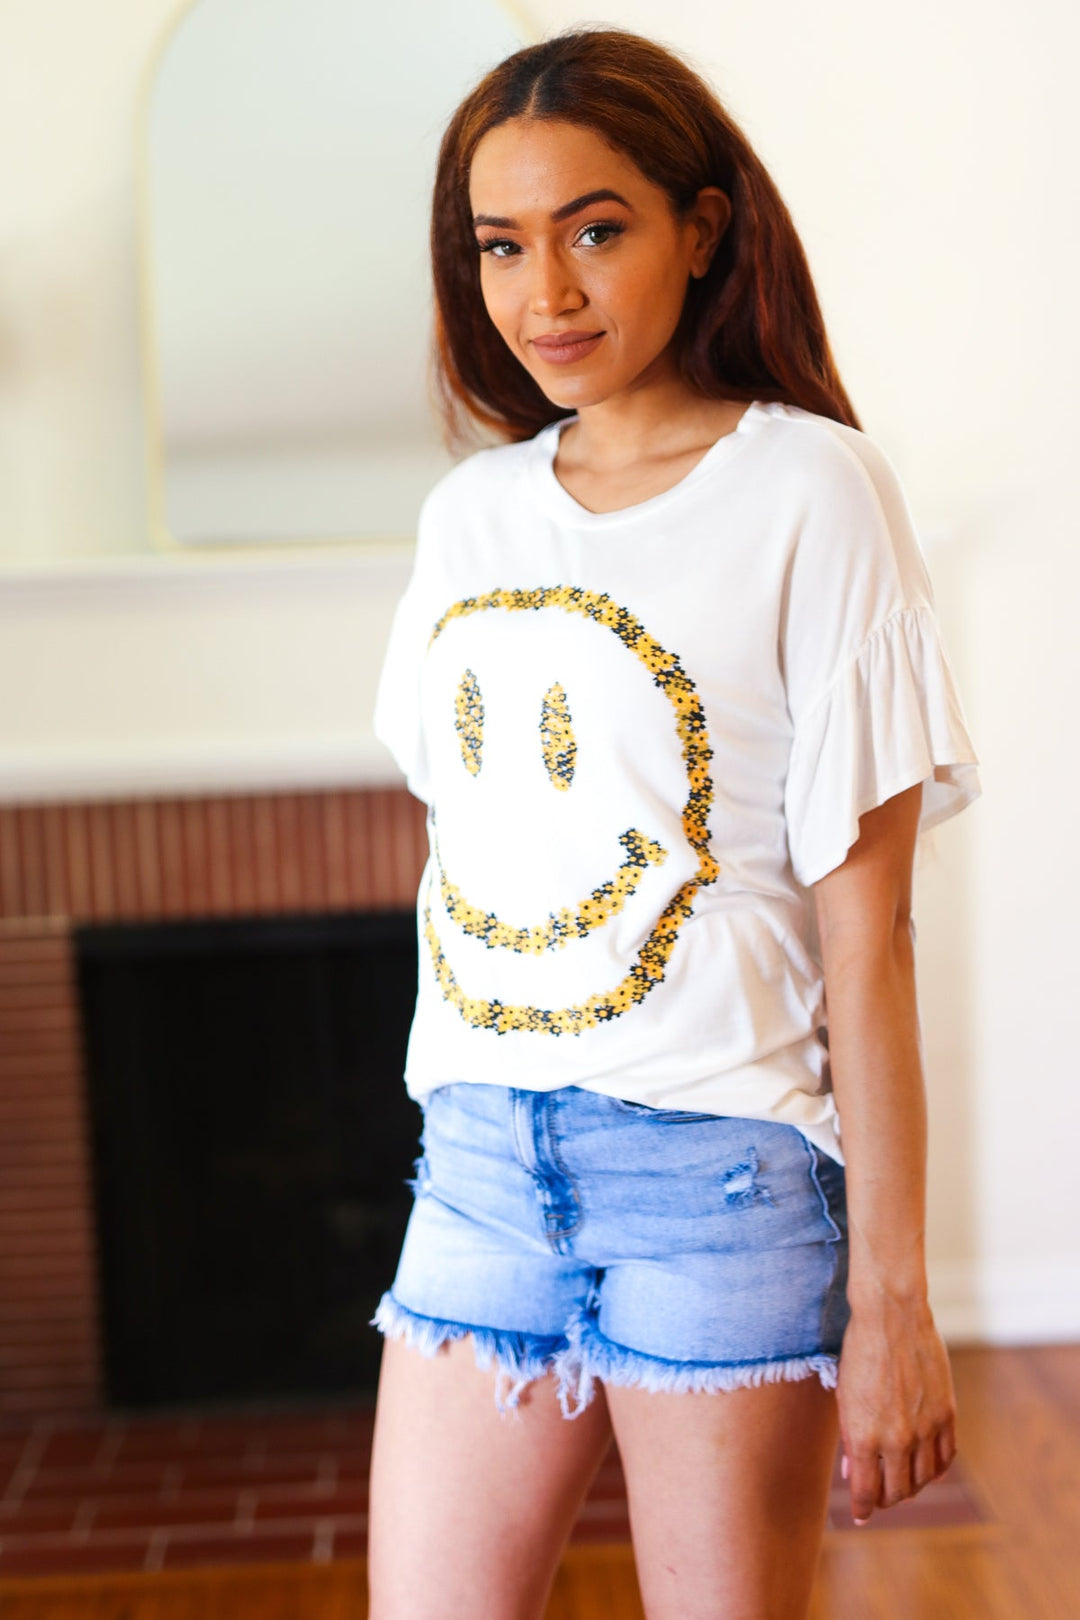 Good Times - Smiley Face Flutter-Sleeve Top - White